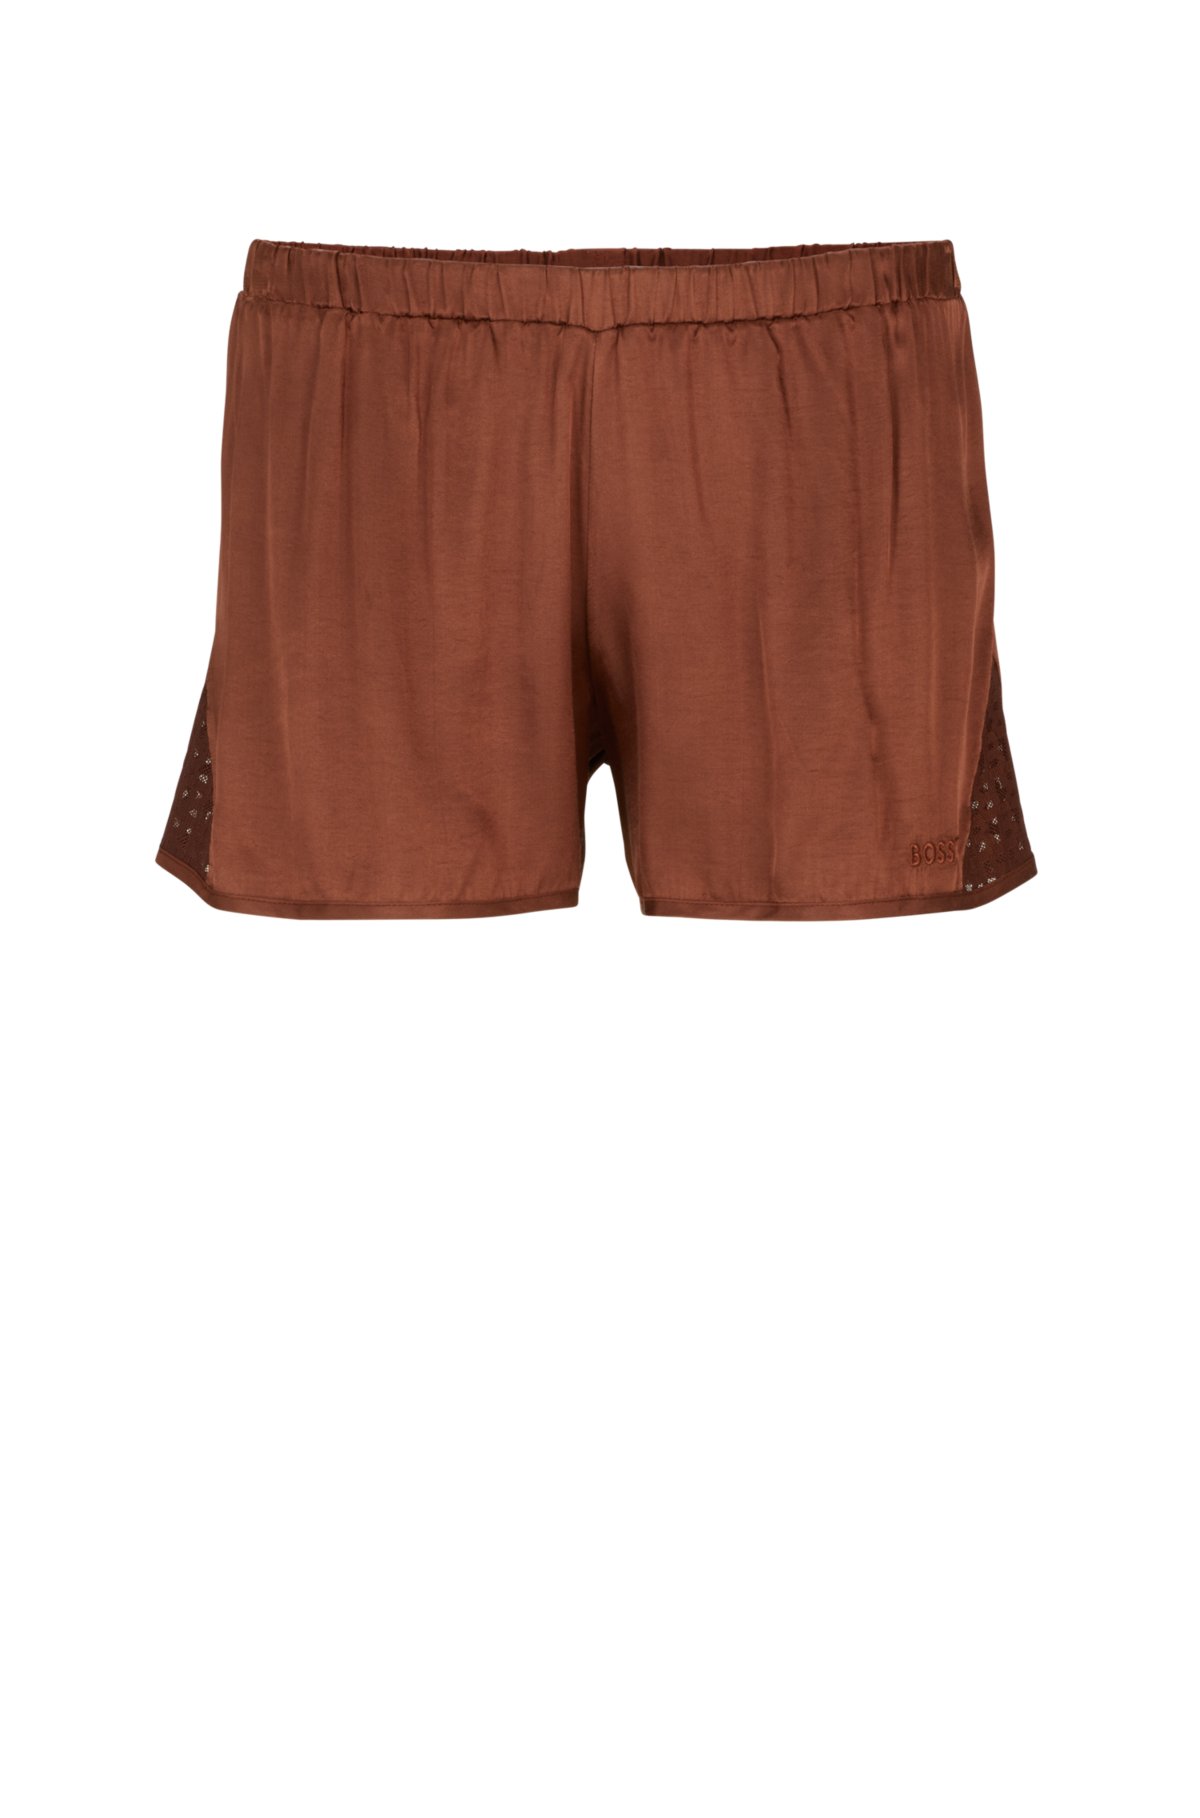 Satin pyjama shorts with covered waistband and monogram details, Brown